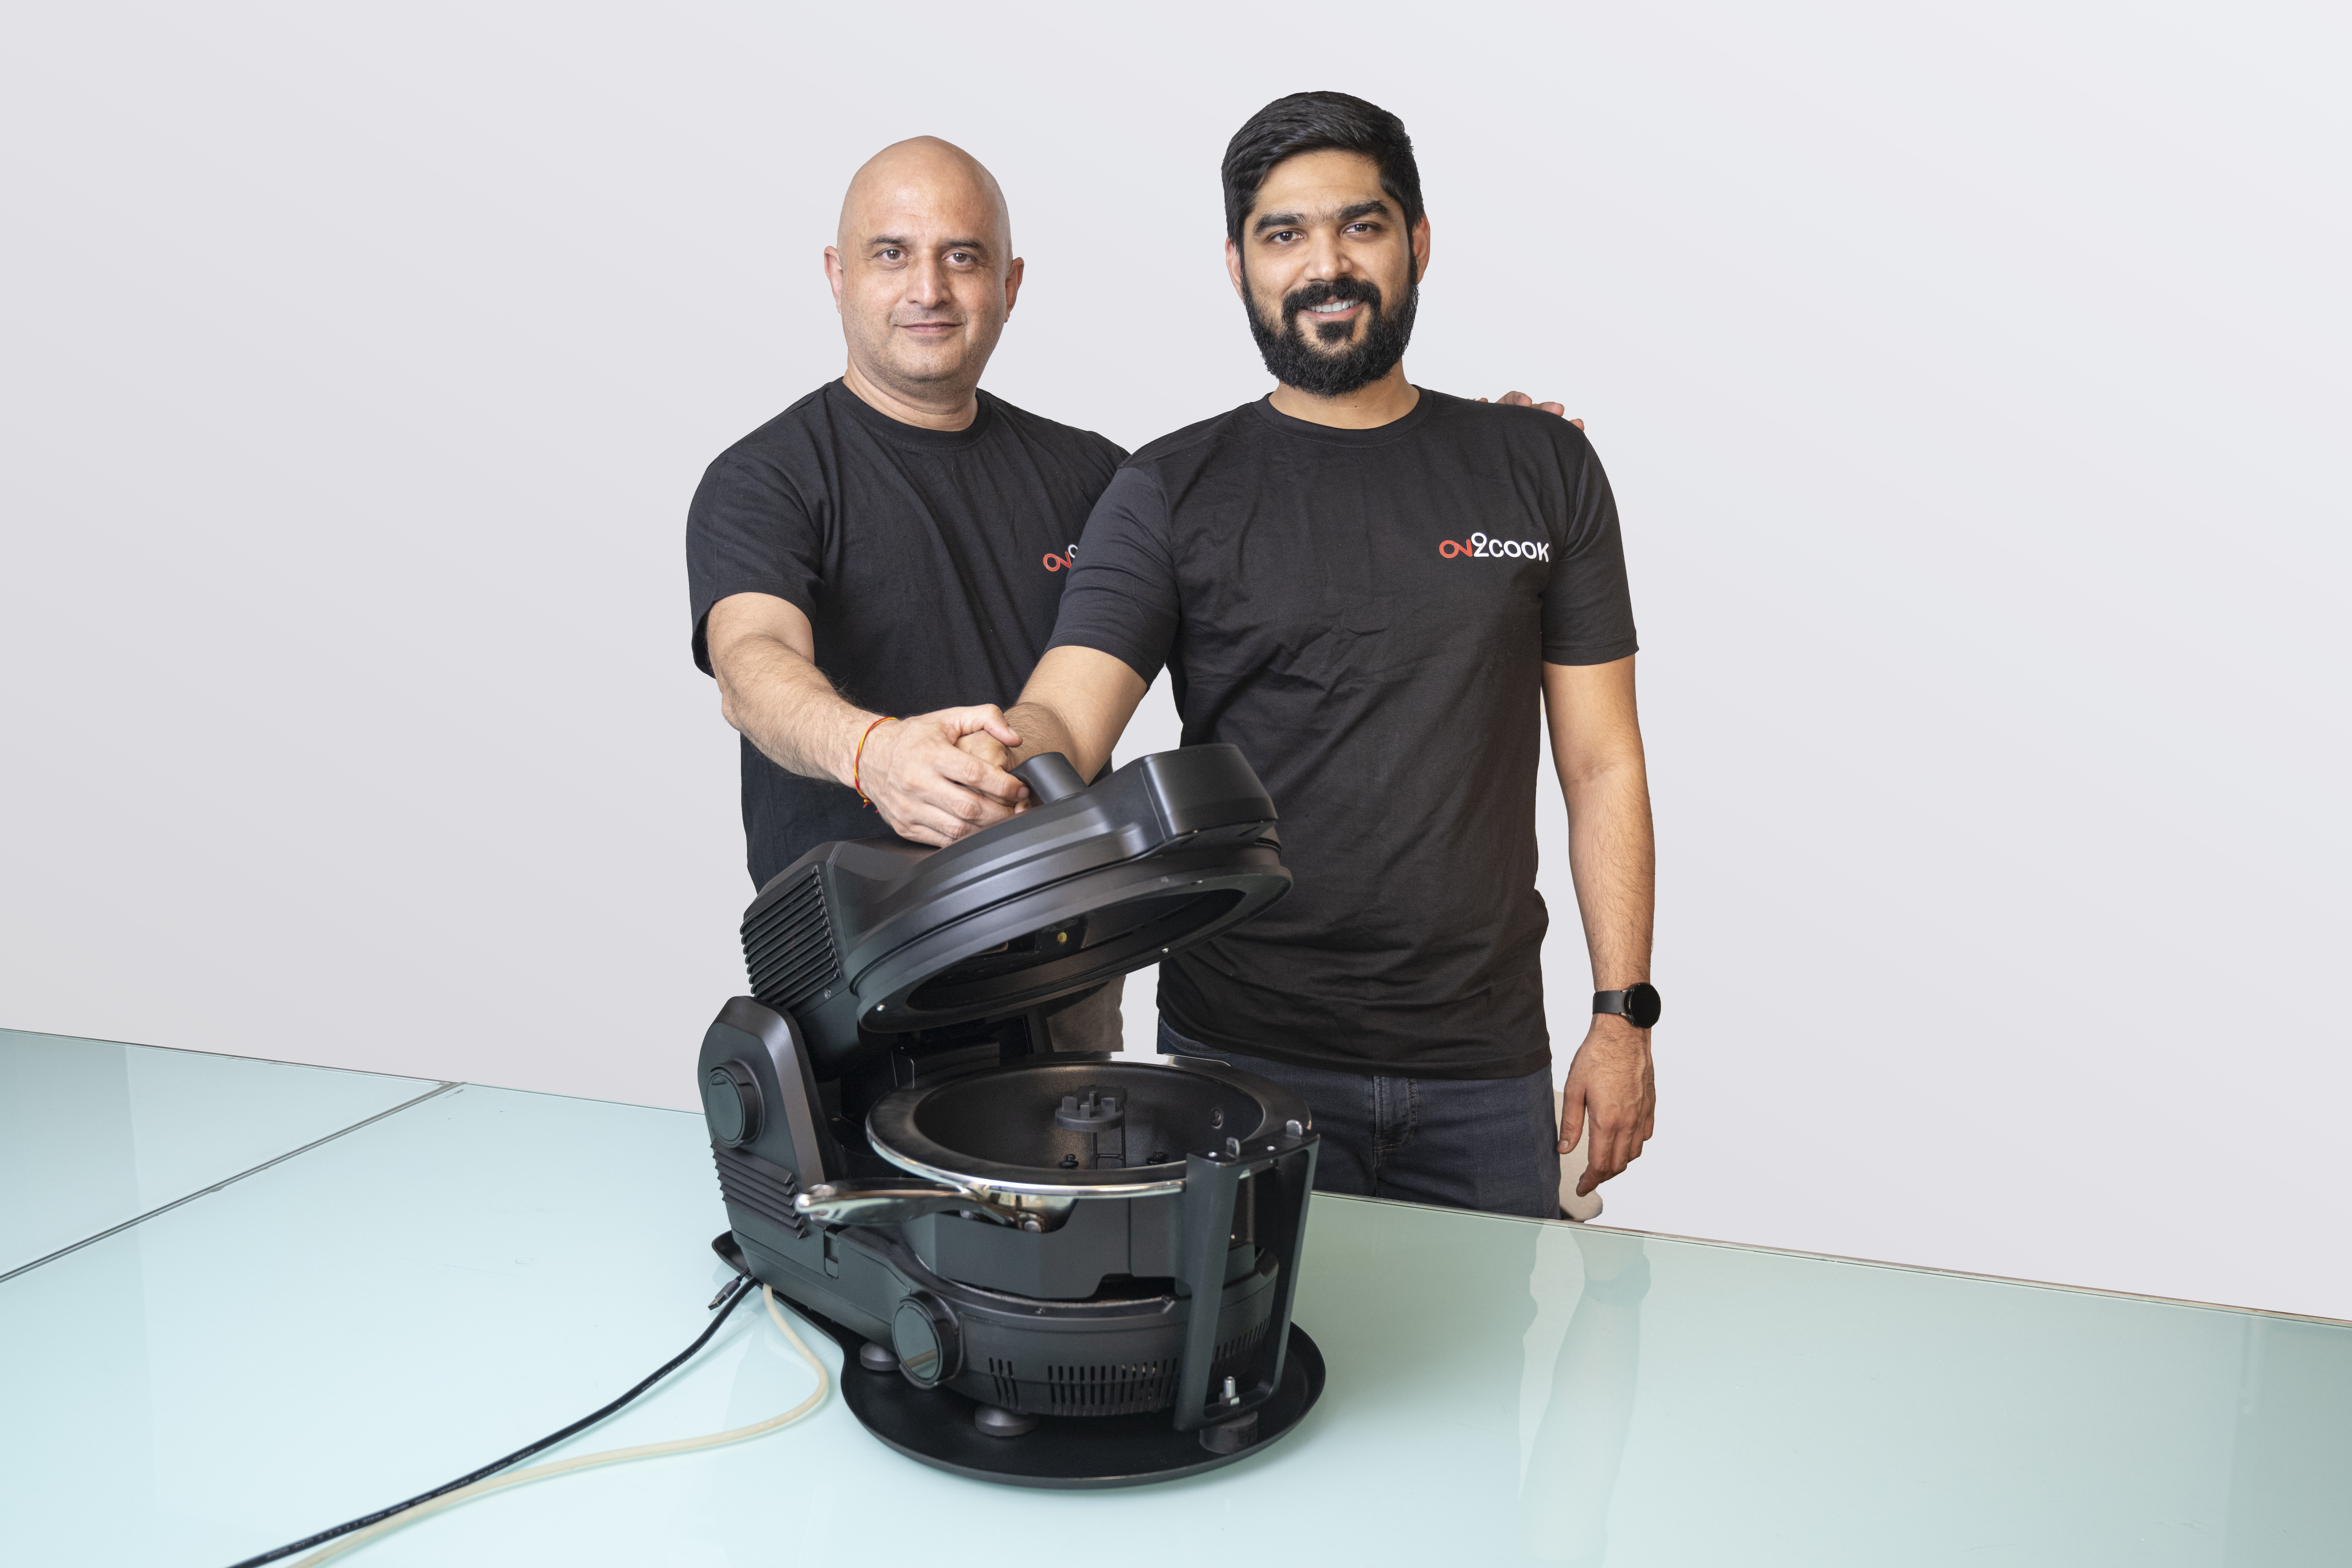 Shark Tank-fame World's Fastest Cooking Device On2Cook Secures Seed Funding  Over 2 Million USD, Valuation Stands at 100 Crore